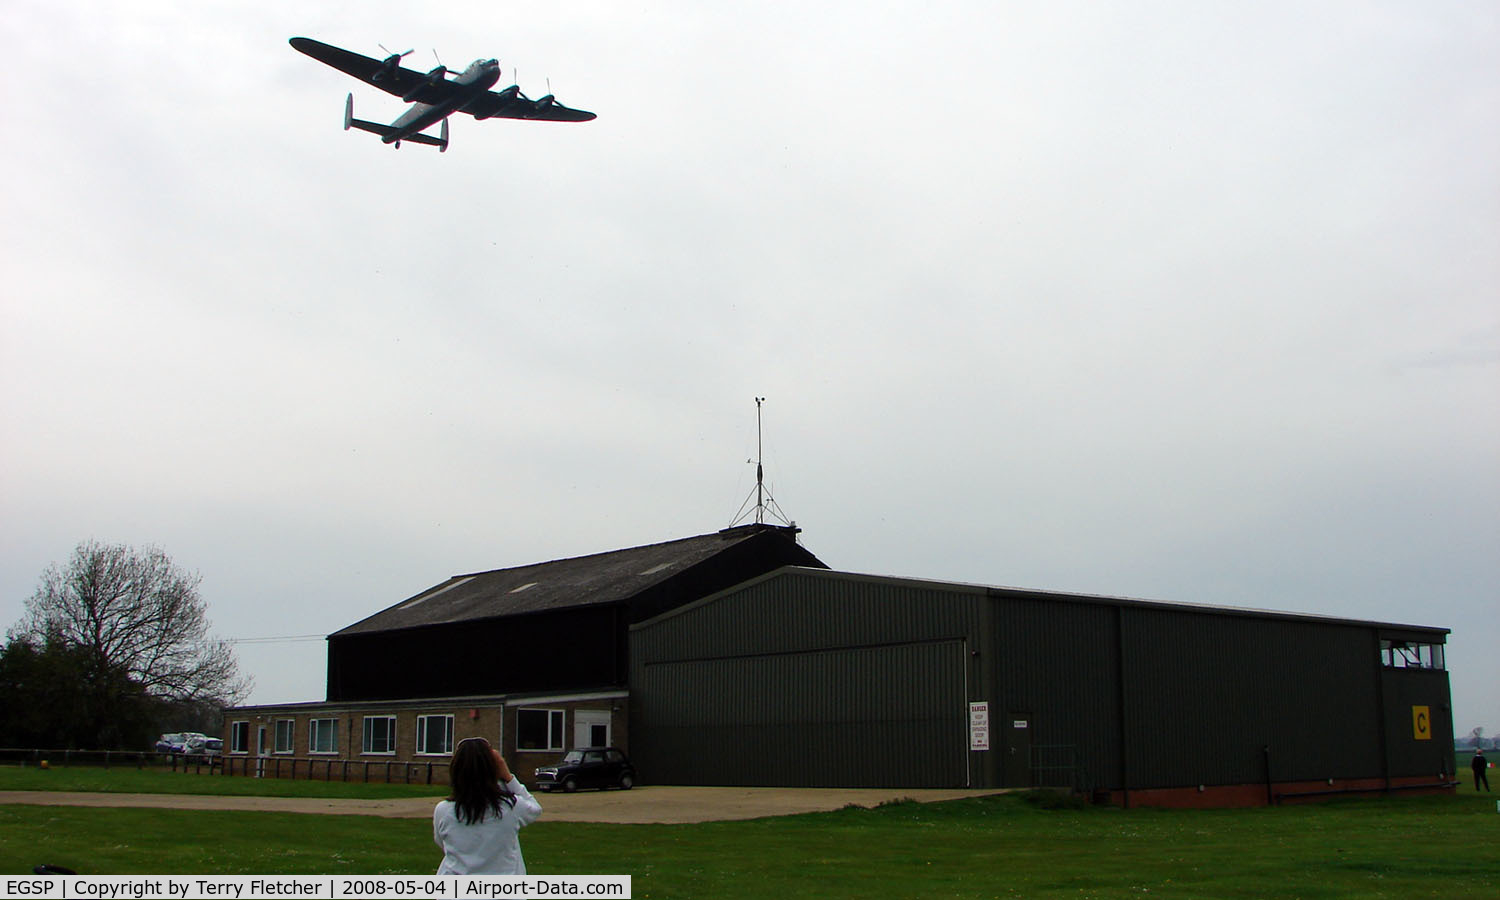 Peterborough/Sibson Airport, Peterborough, England United Kingdom (EGSP) - Lancaster Bomber does a low flypast at Peterborough Sibson after displaying at the nearby East of England Showground